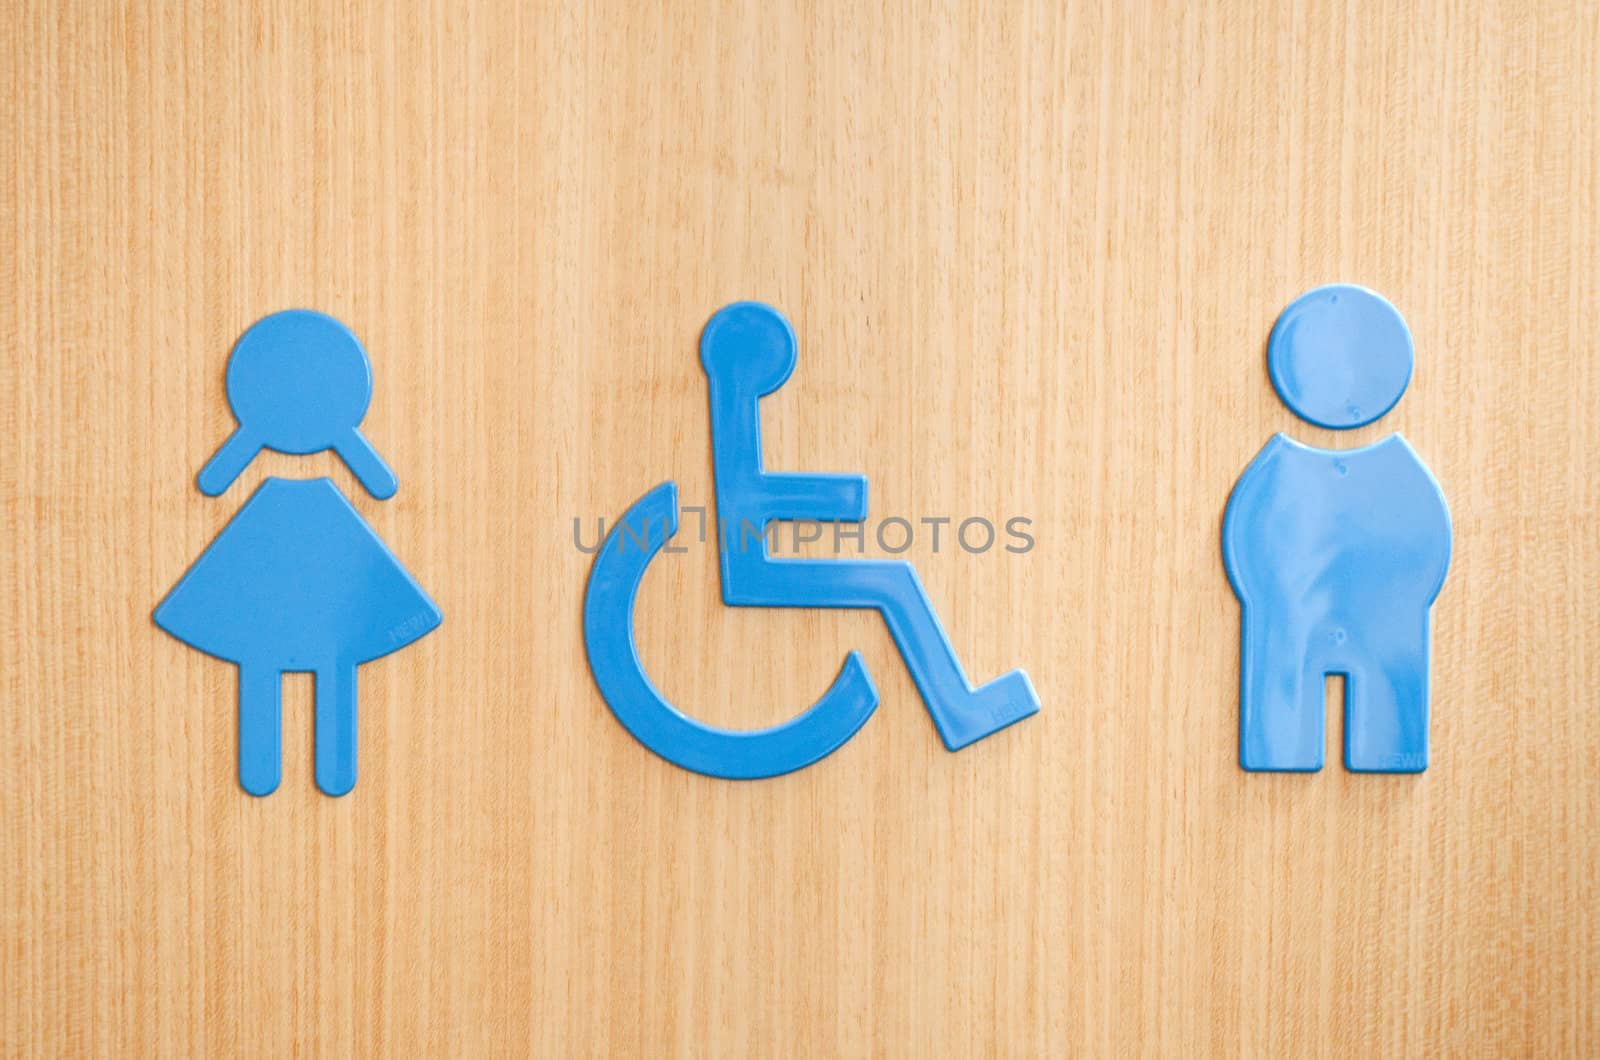 blue toilets WC sign for men, wheelchair and women (wooden background)